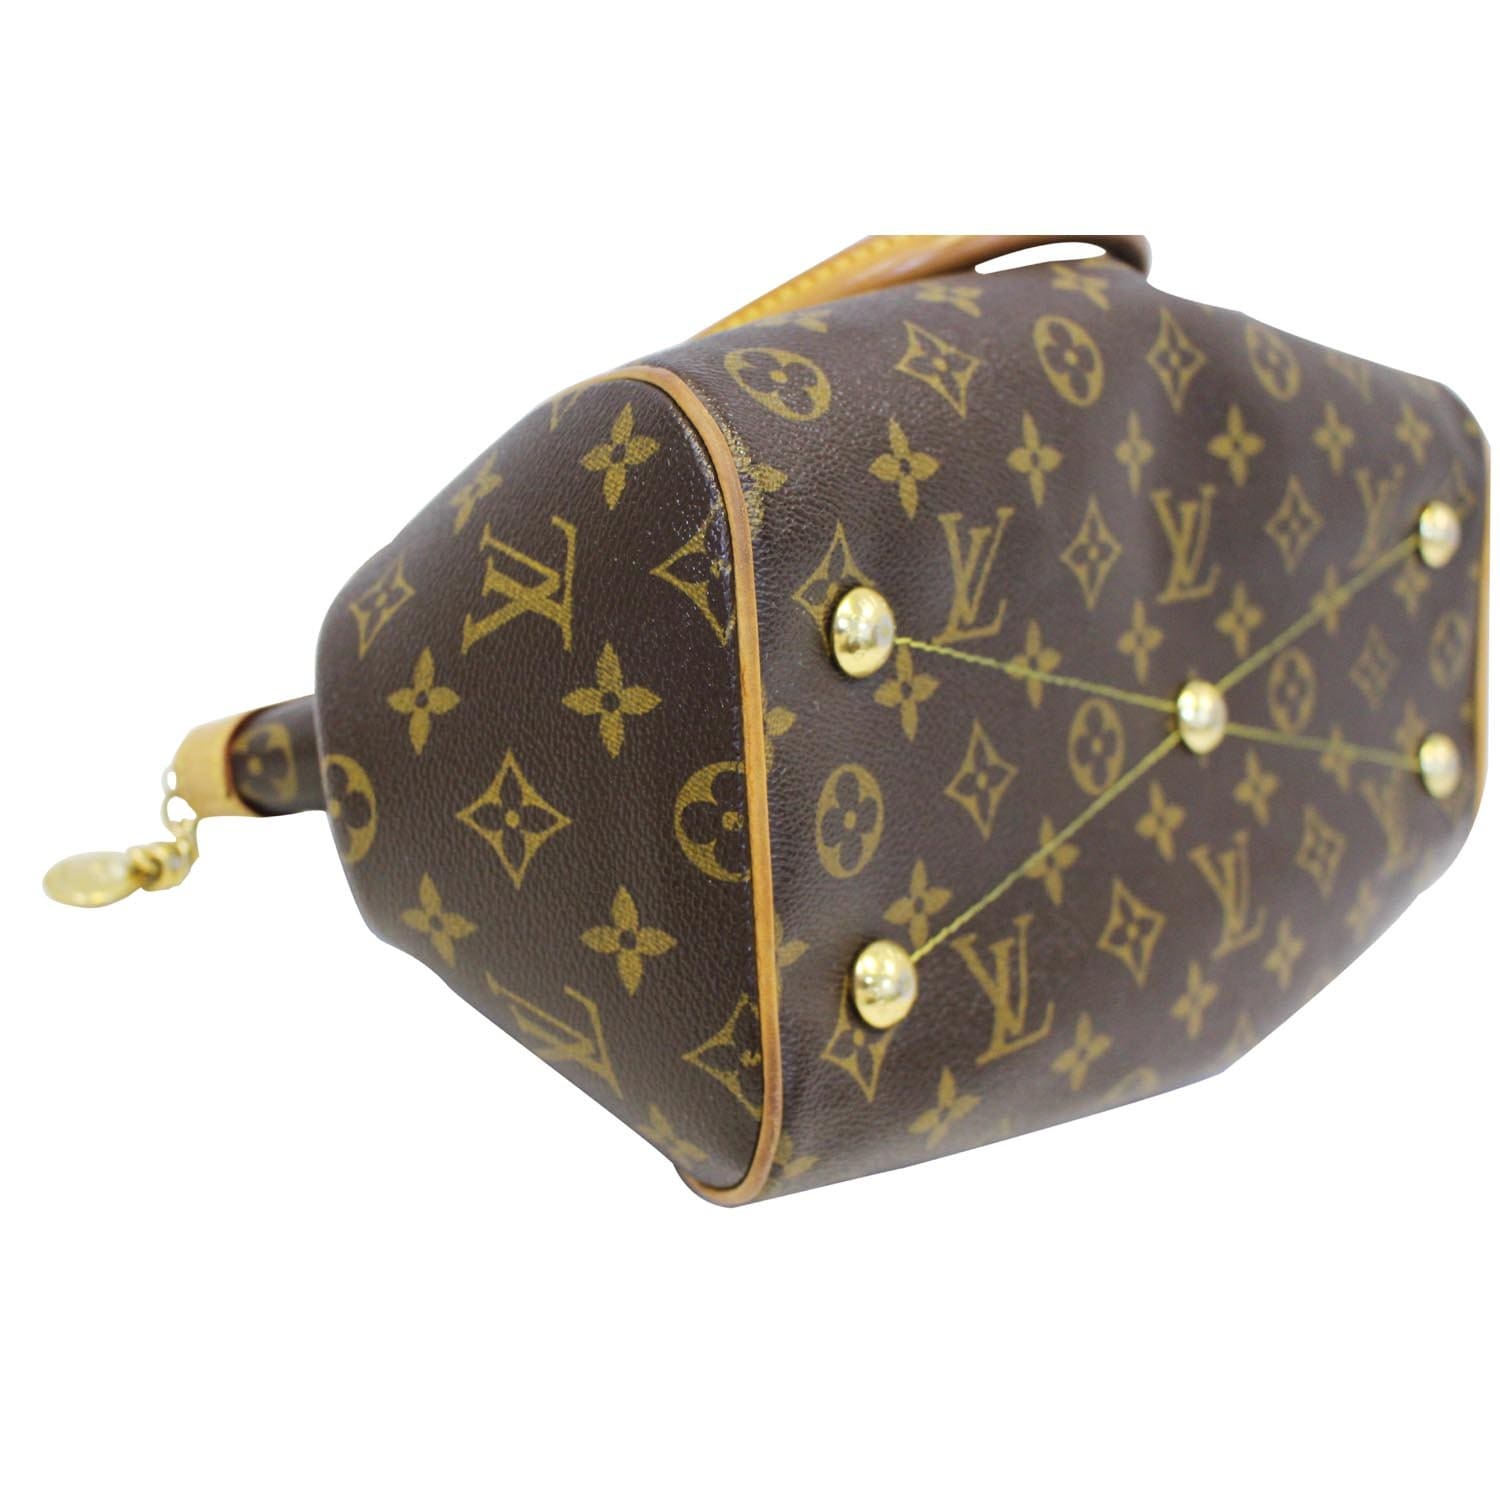 Customized Louis Vuitton Plat Moody Minnie Tote bag in brown monogram  canvas at 1stDibs